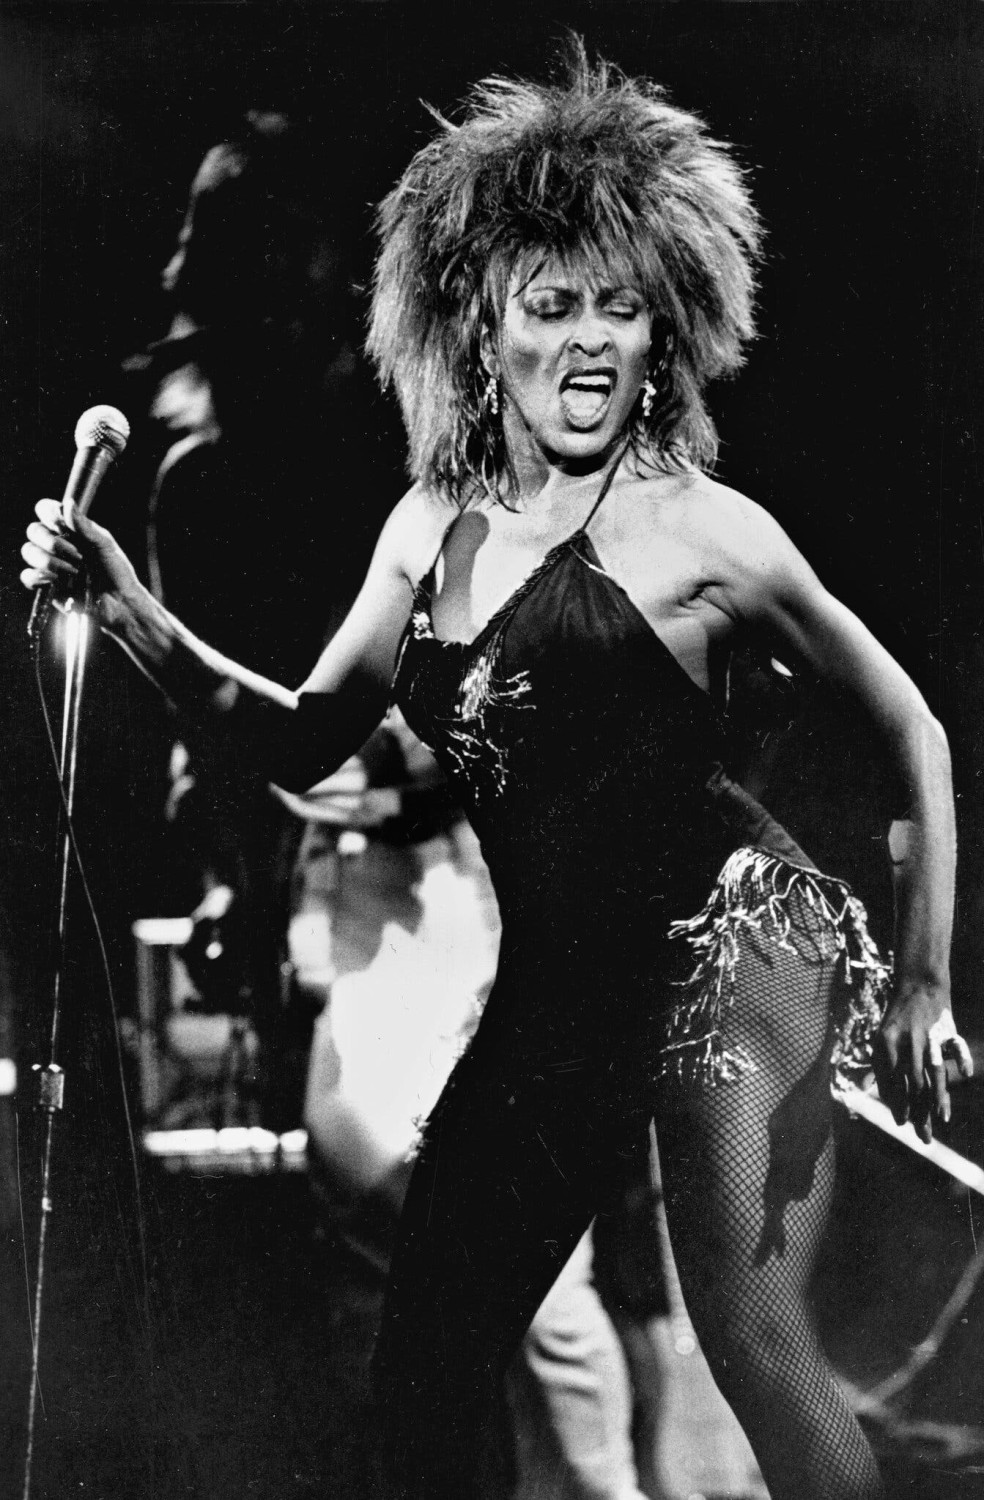 Tina Turner, Magnetic Singer of Explosive Power, Is Dead at 83